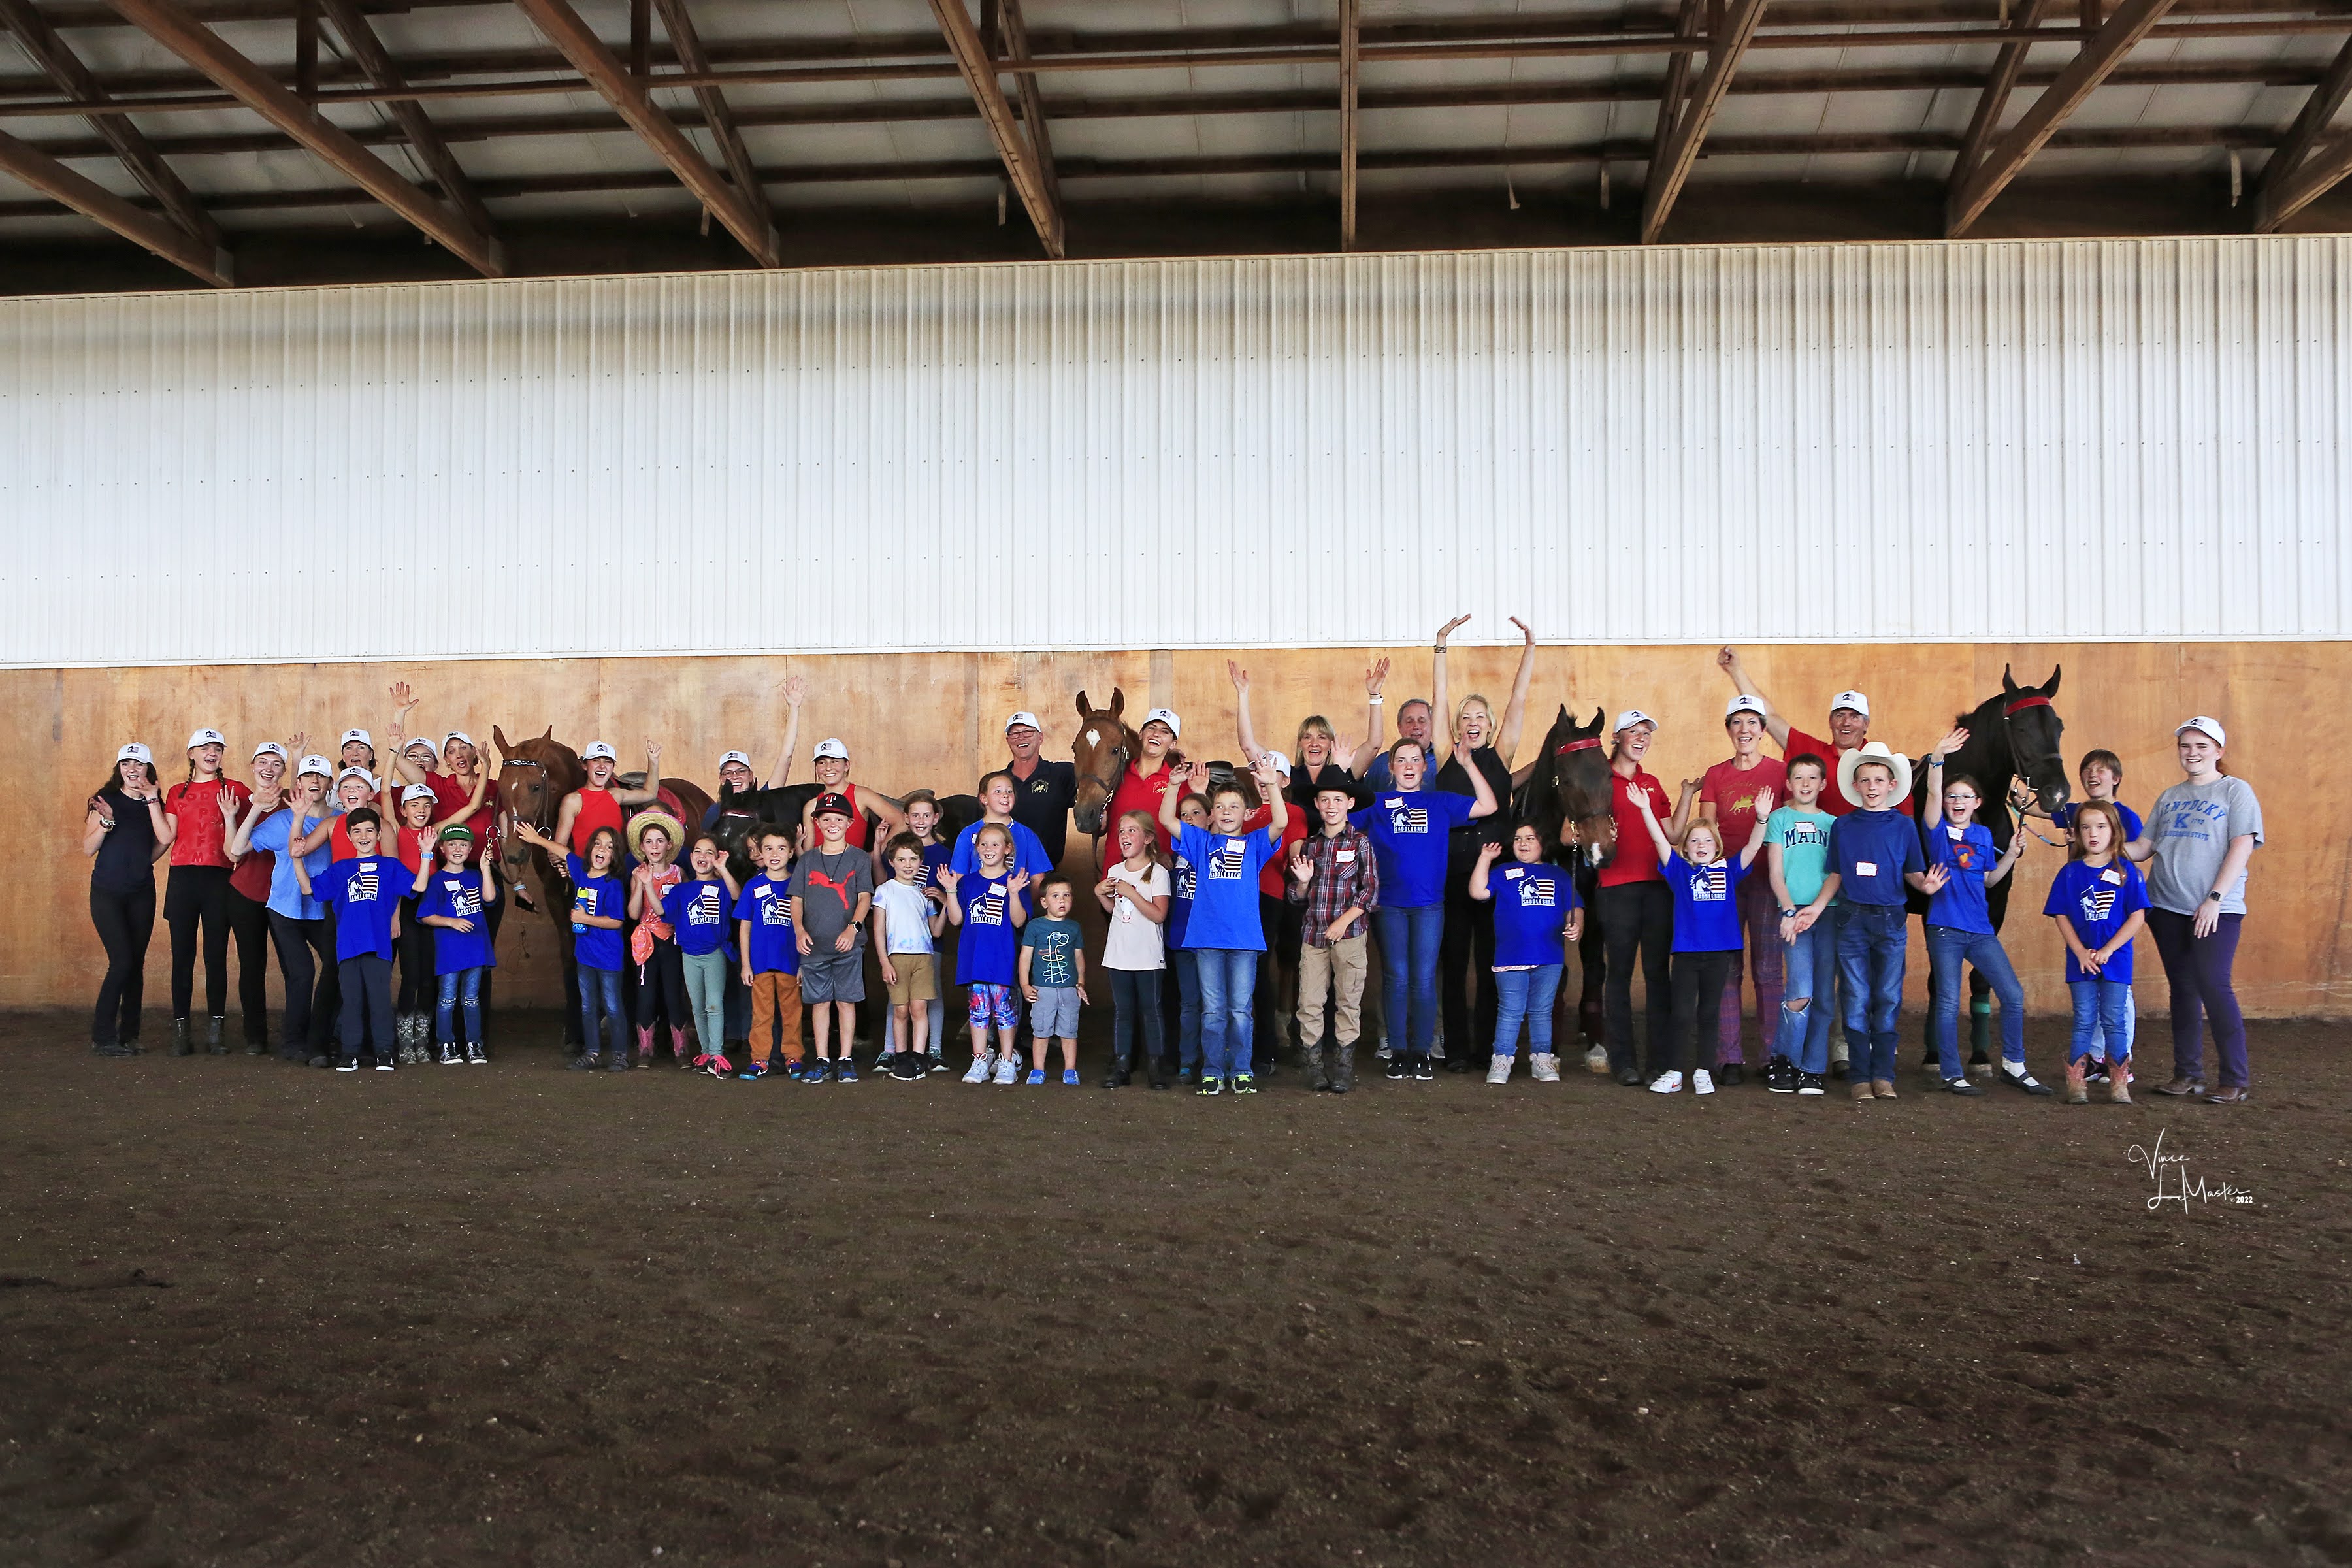 Many equine enthusiasts of all ages posing in a barn.